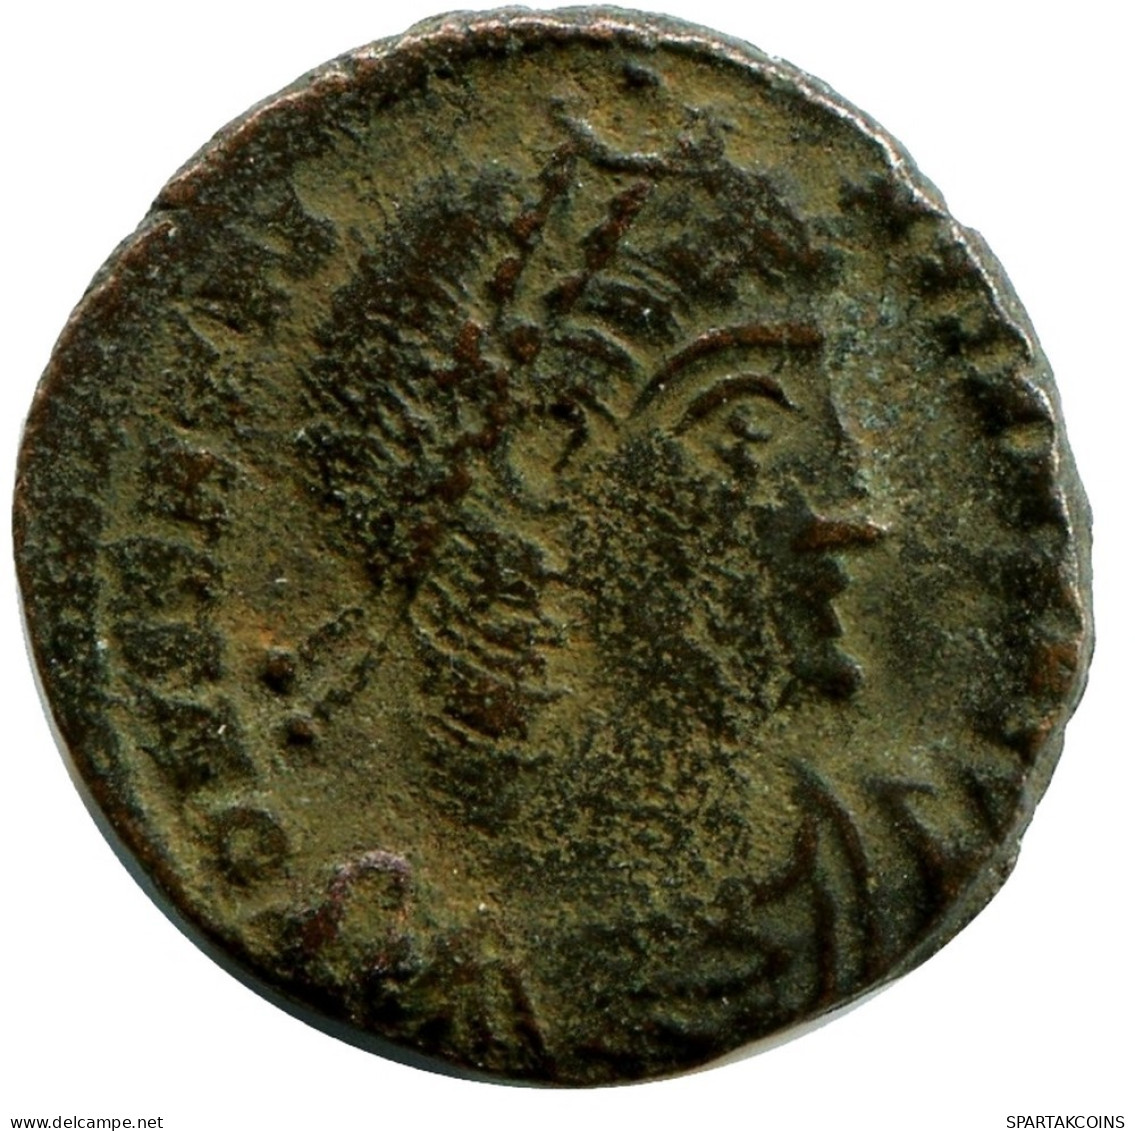 CONSTANTINE I MINTED IN CYZICUS FROM THE ROYAL ONTARIO MUSEUM #ANC11030.14.E.A - L'Empire Chrétien (307 à 363)